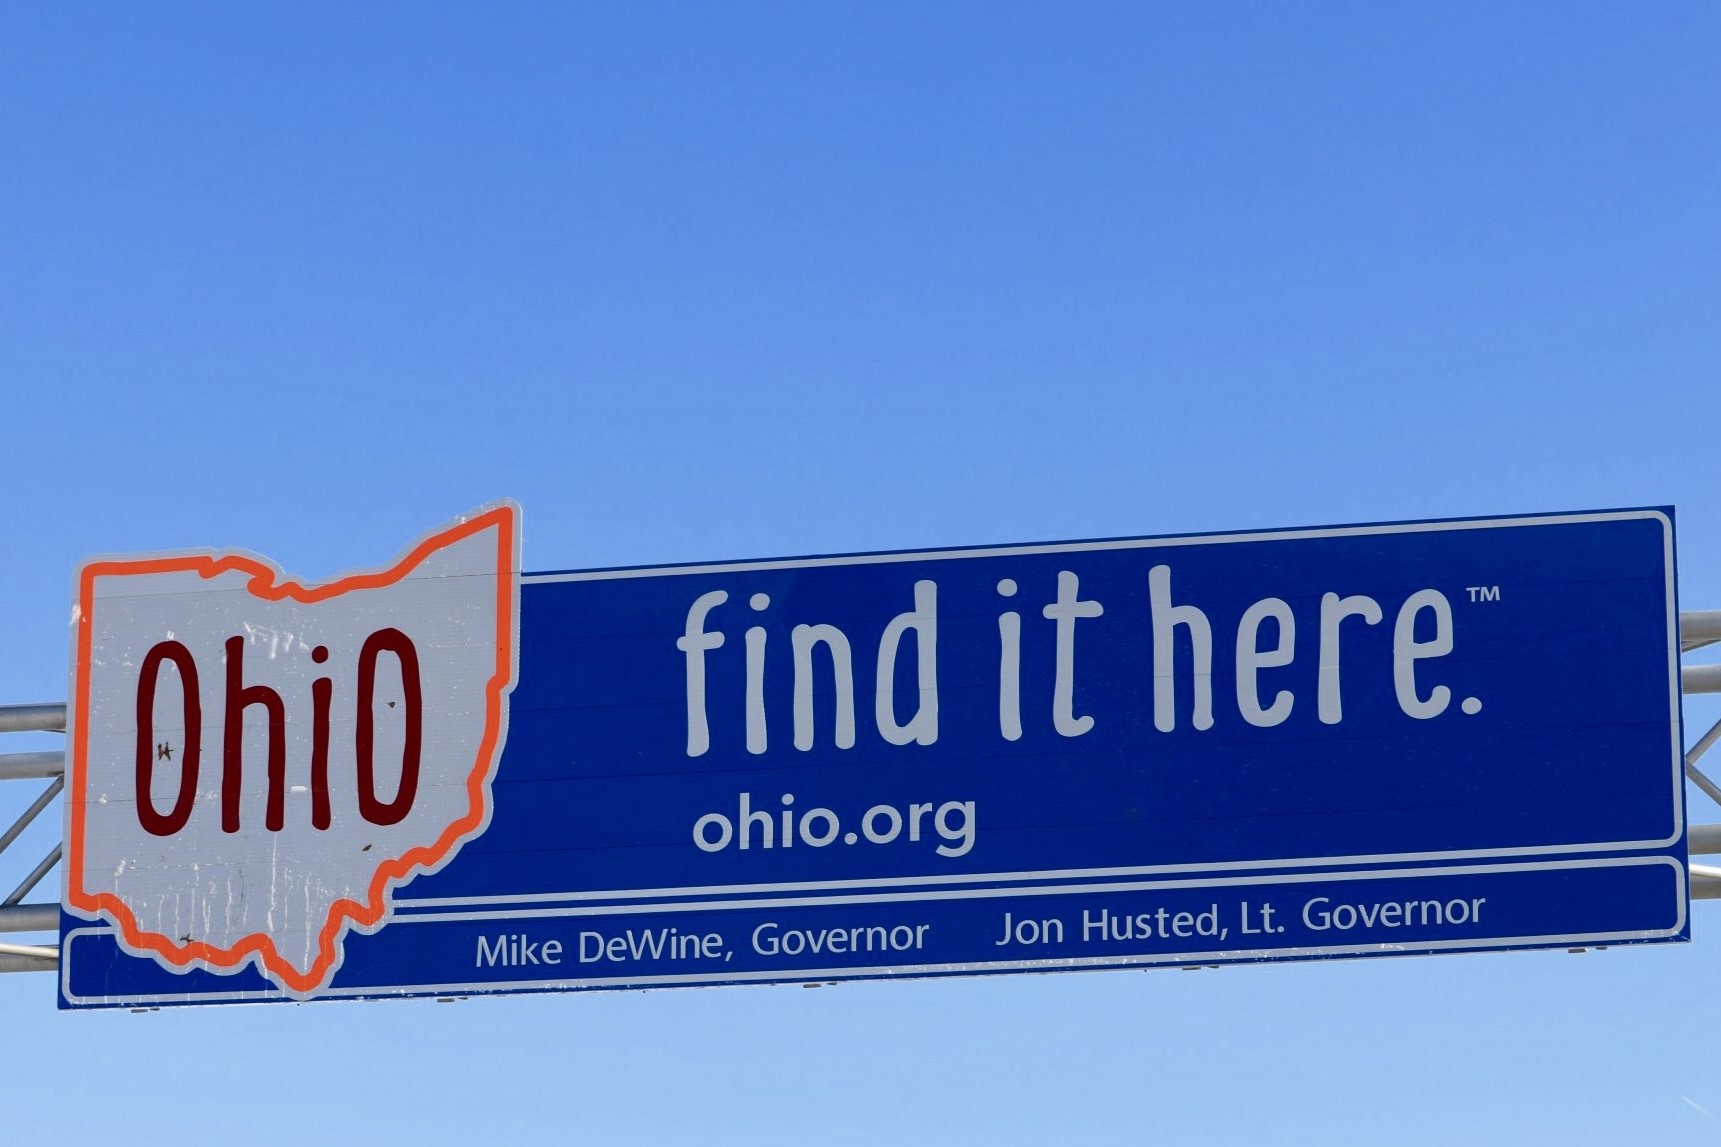 The Shocking Truth Behind Ohio's Infamous Reputation